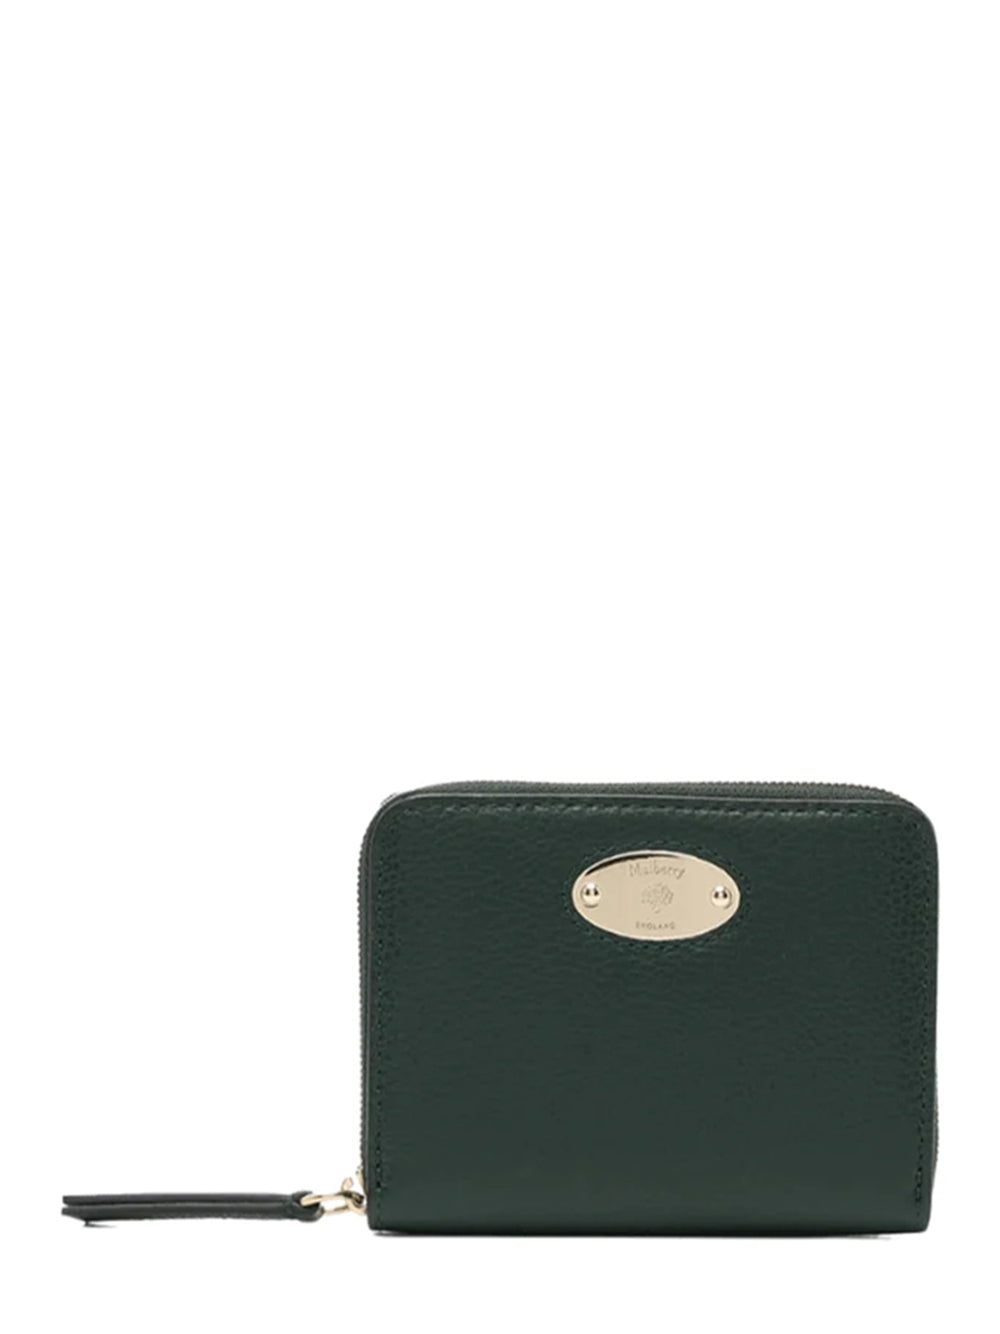 Mulberry Plaque Small Zip Small Classic Grain (Mulberry Green)